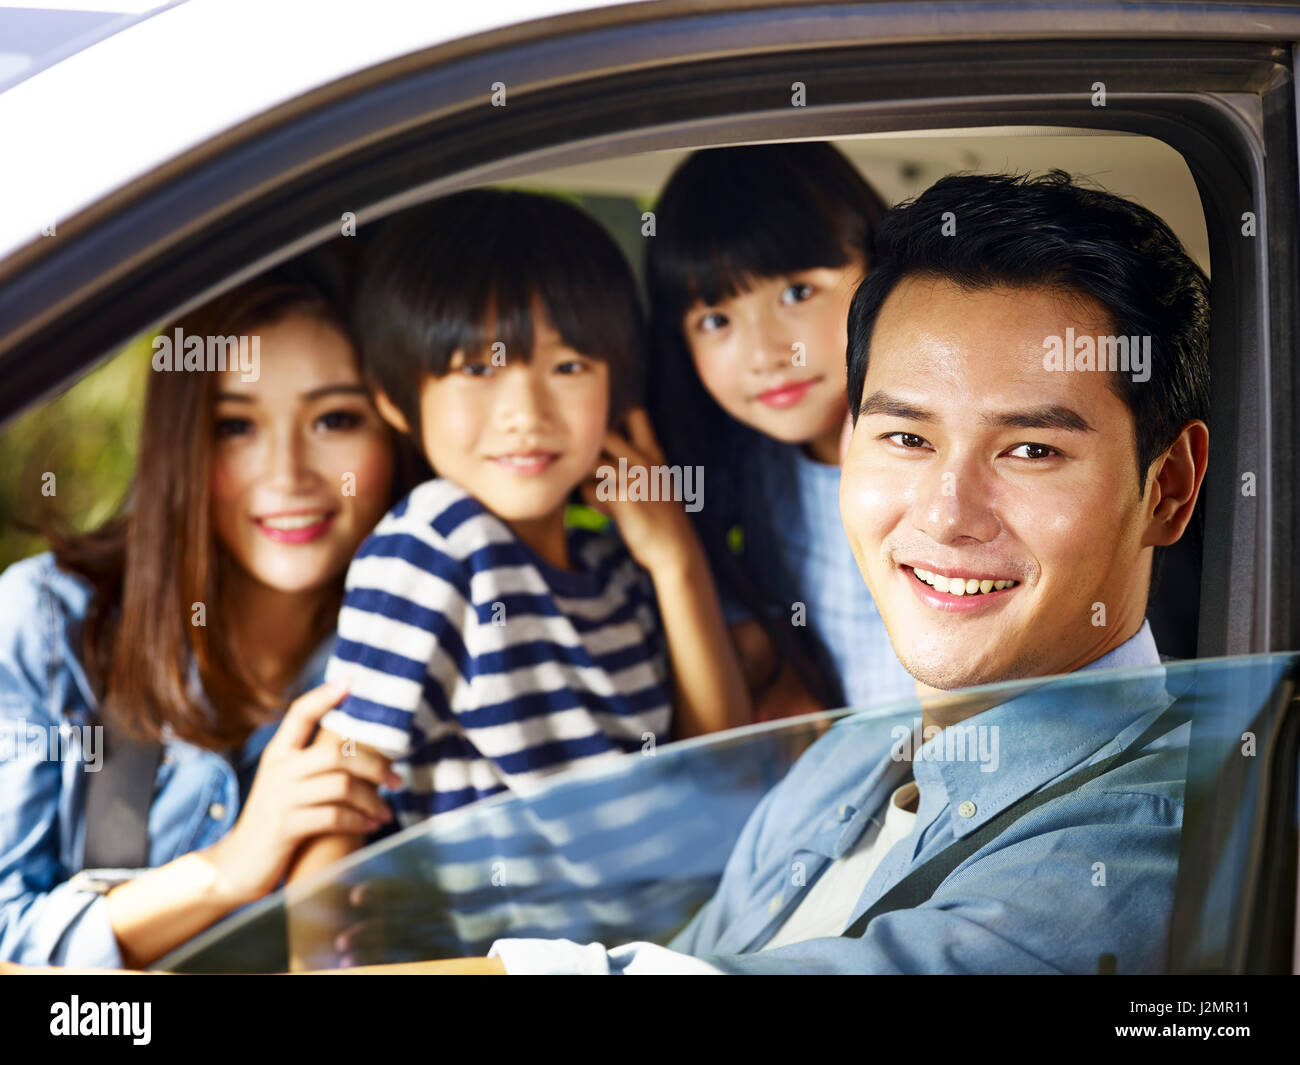 happy asian family with two children traveling by car, focus on the man. Stock Photo